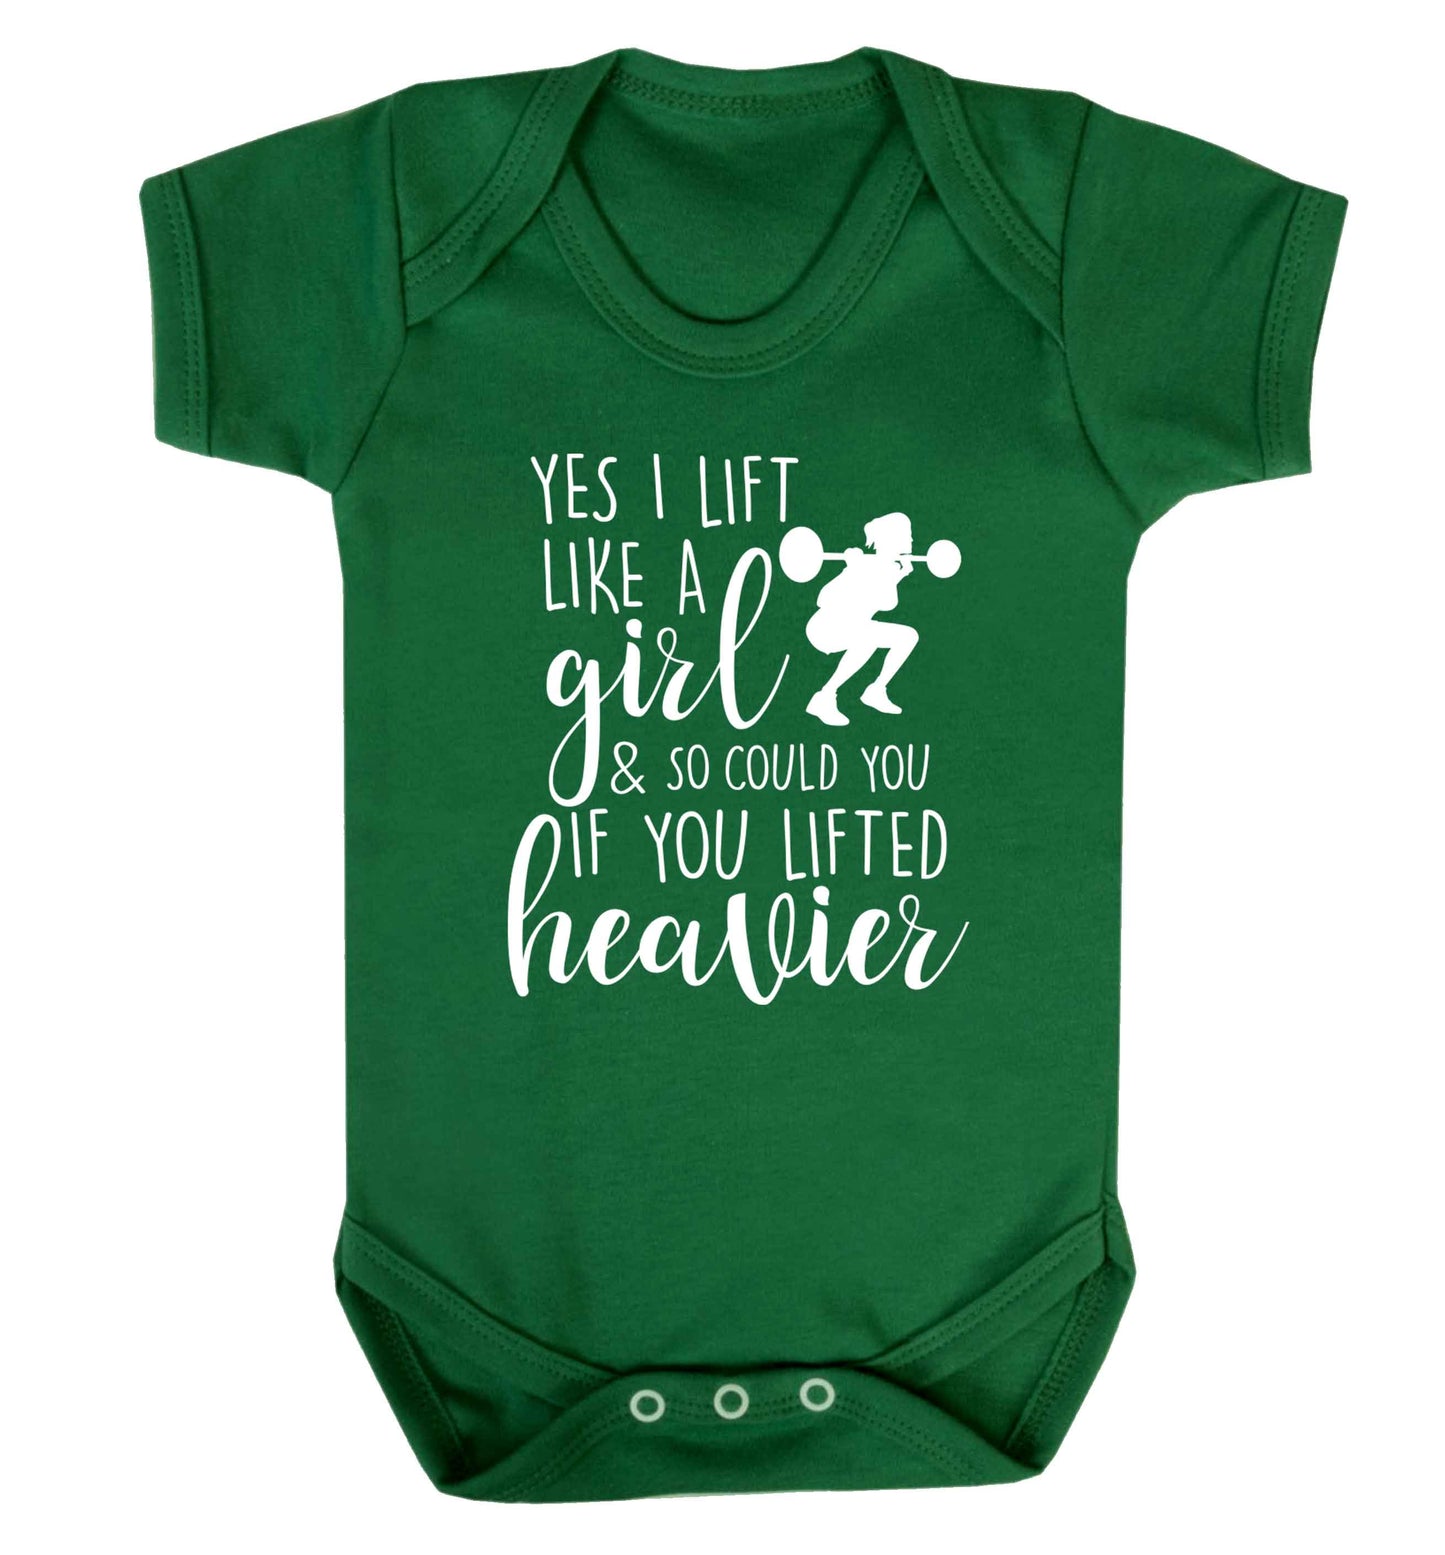 Yes I lift like a girl and so could you if you lifted heavier Baby Vest green 18-24 months